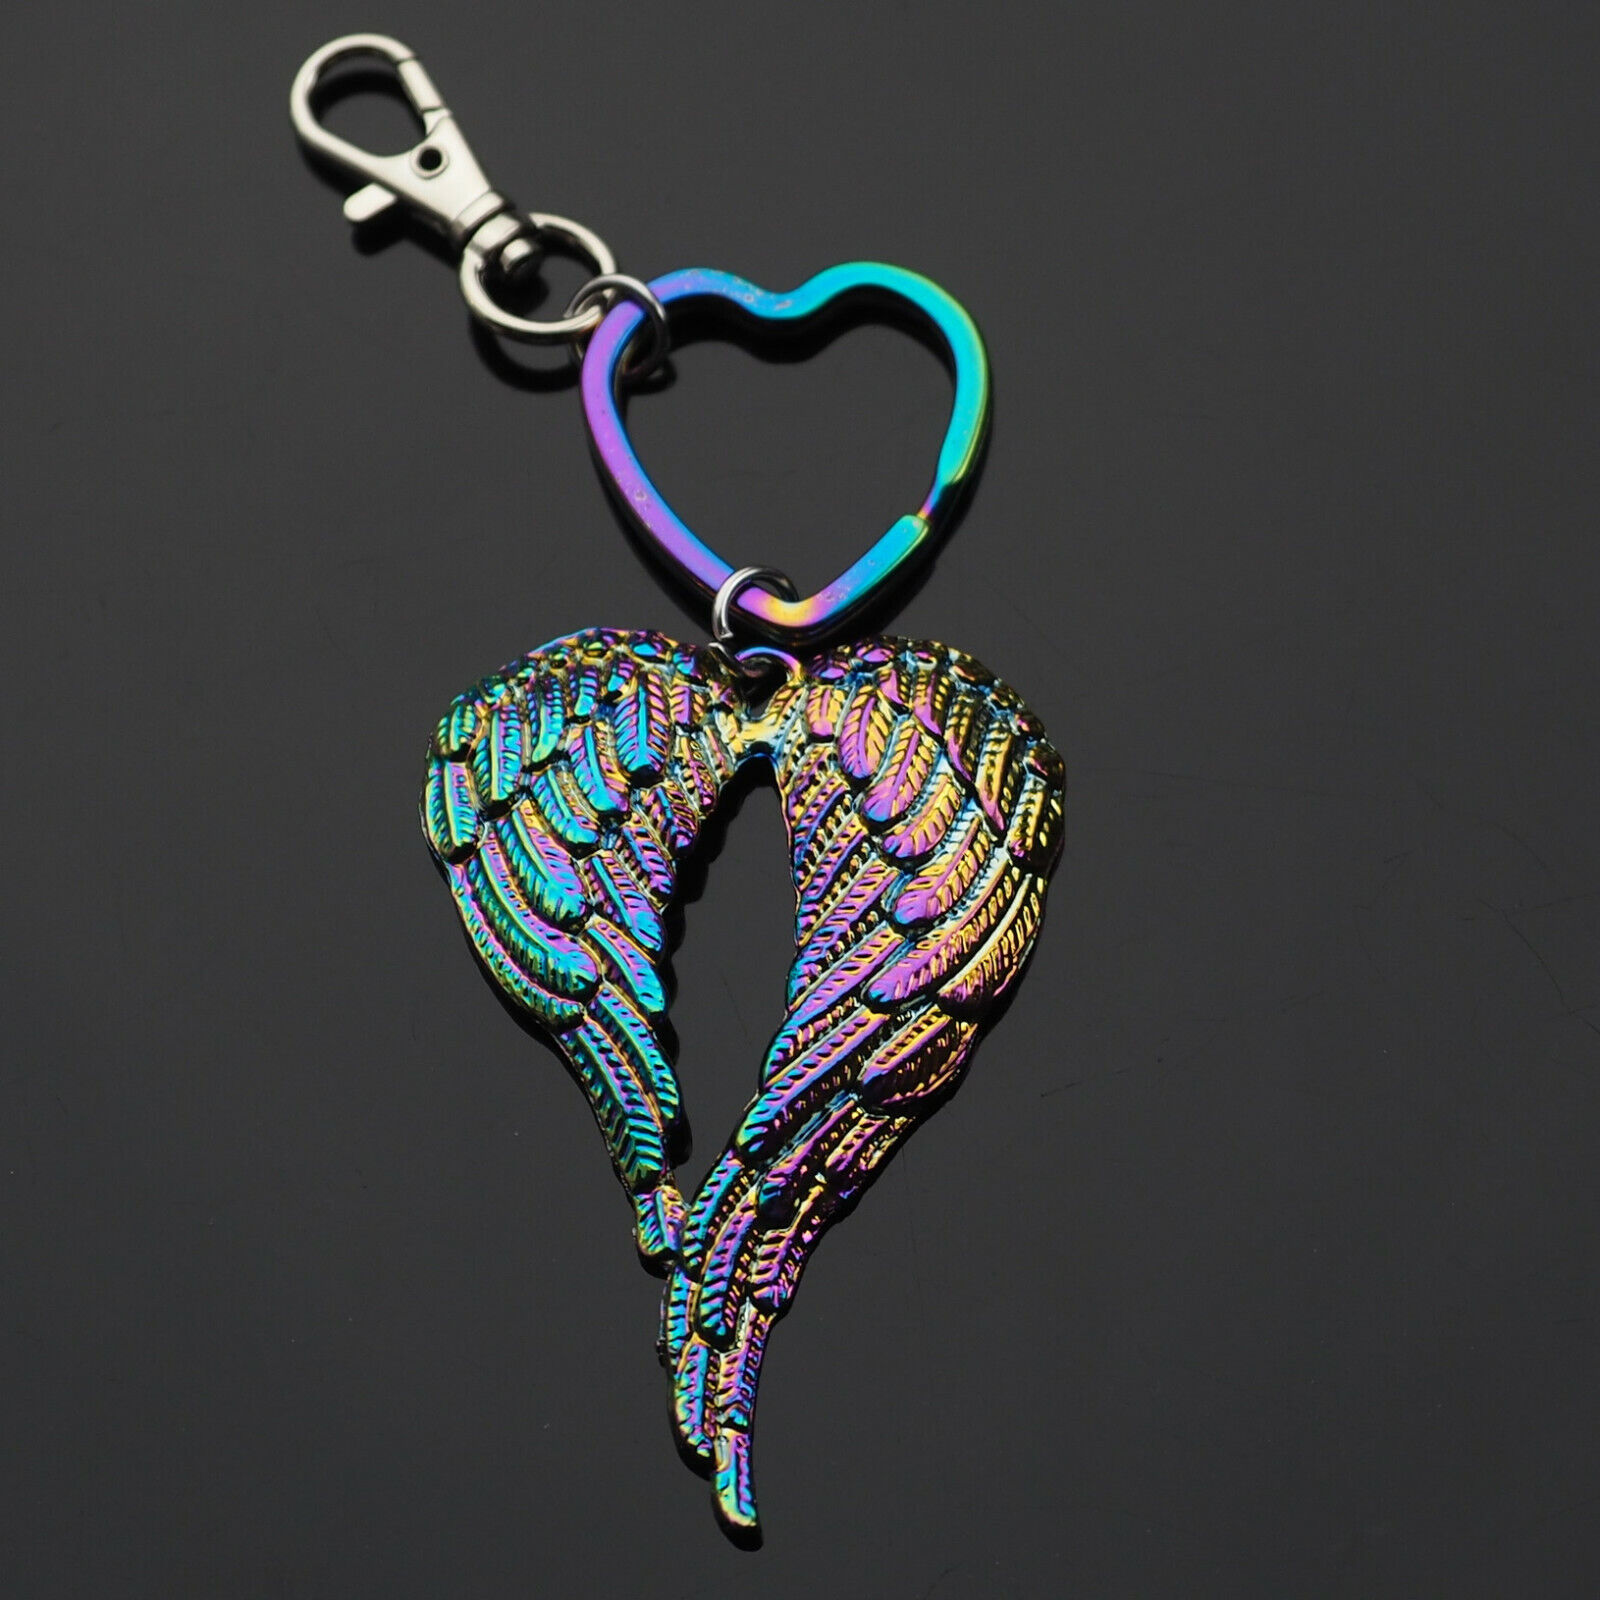 Angel Wings Feathers Rainbow Neon Keychain Pendant Heart Shaped Key Ring Clip